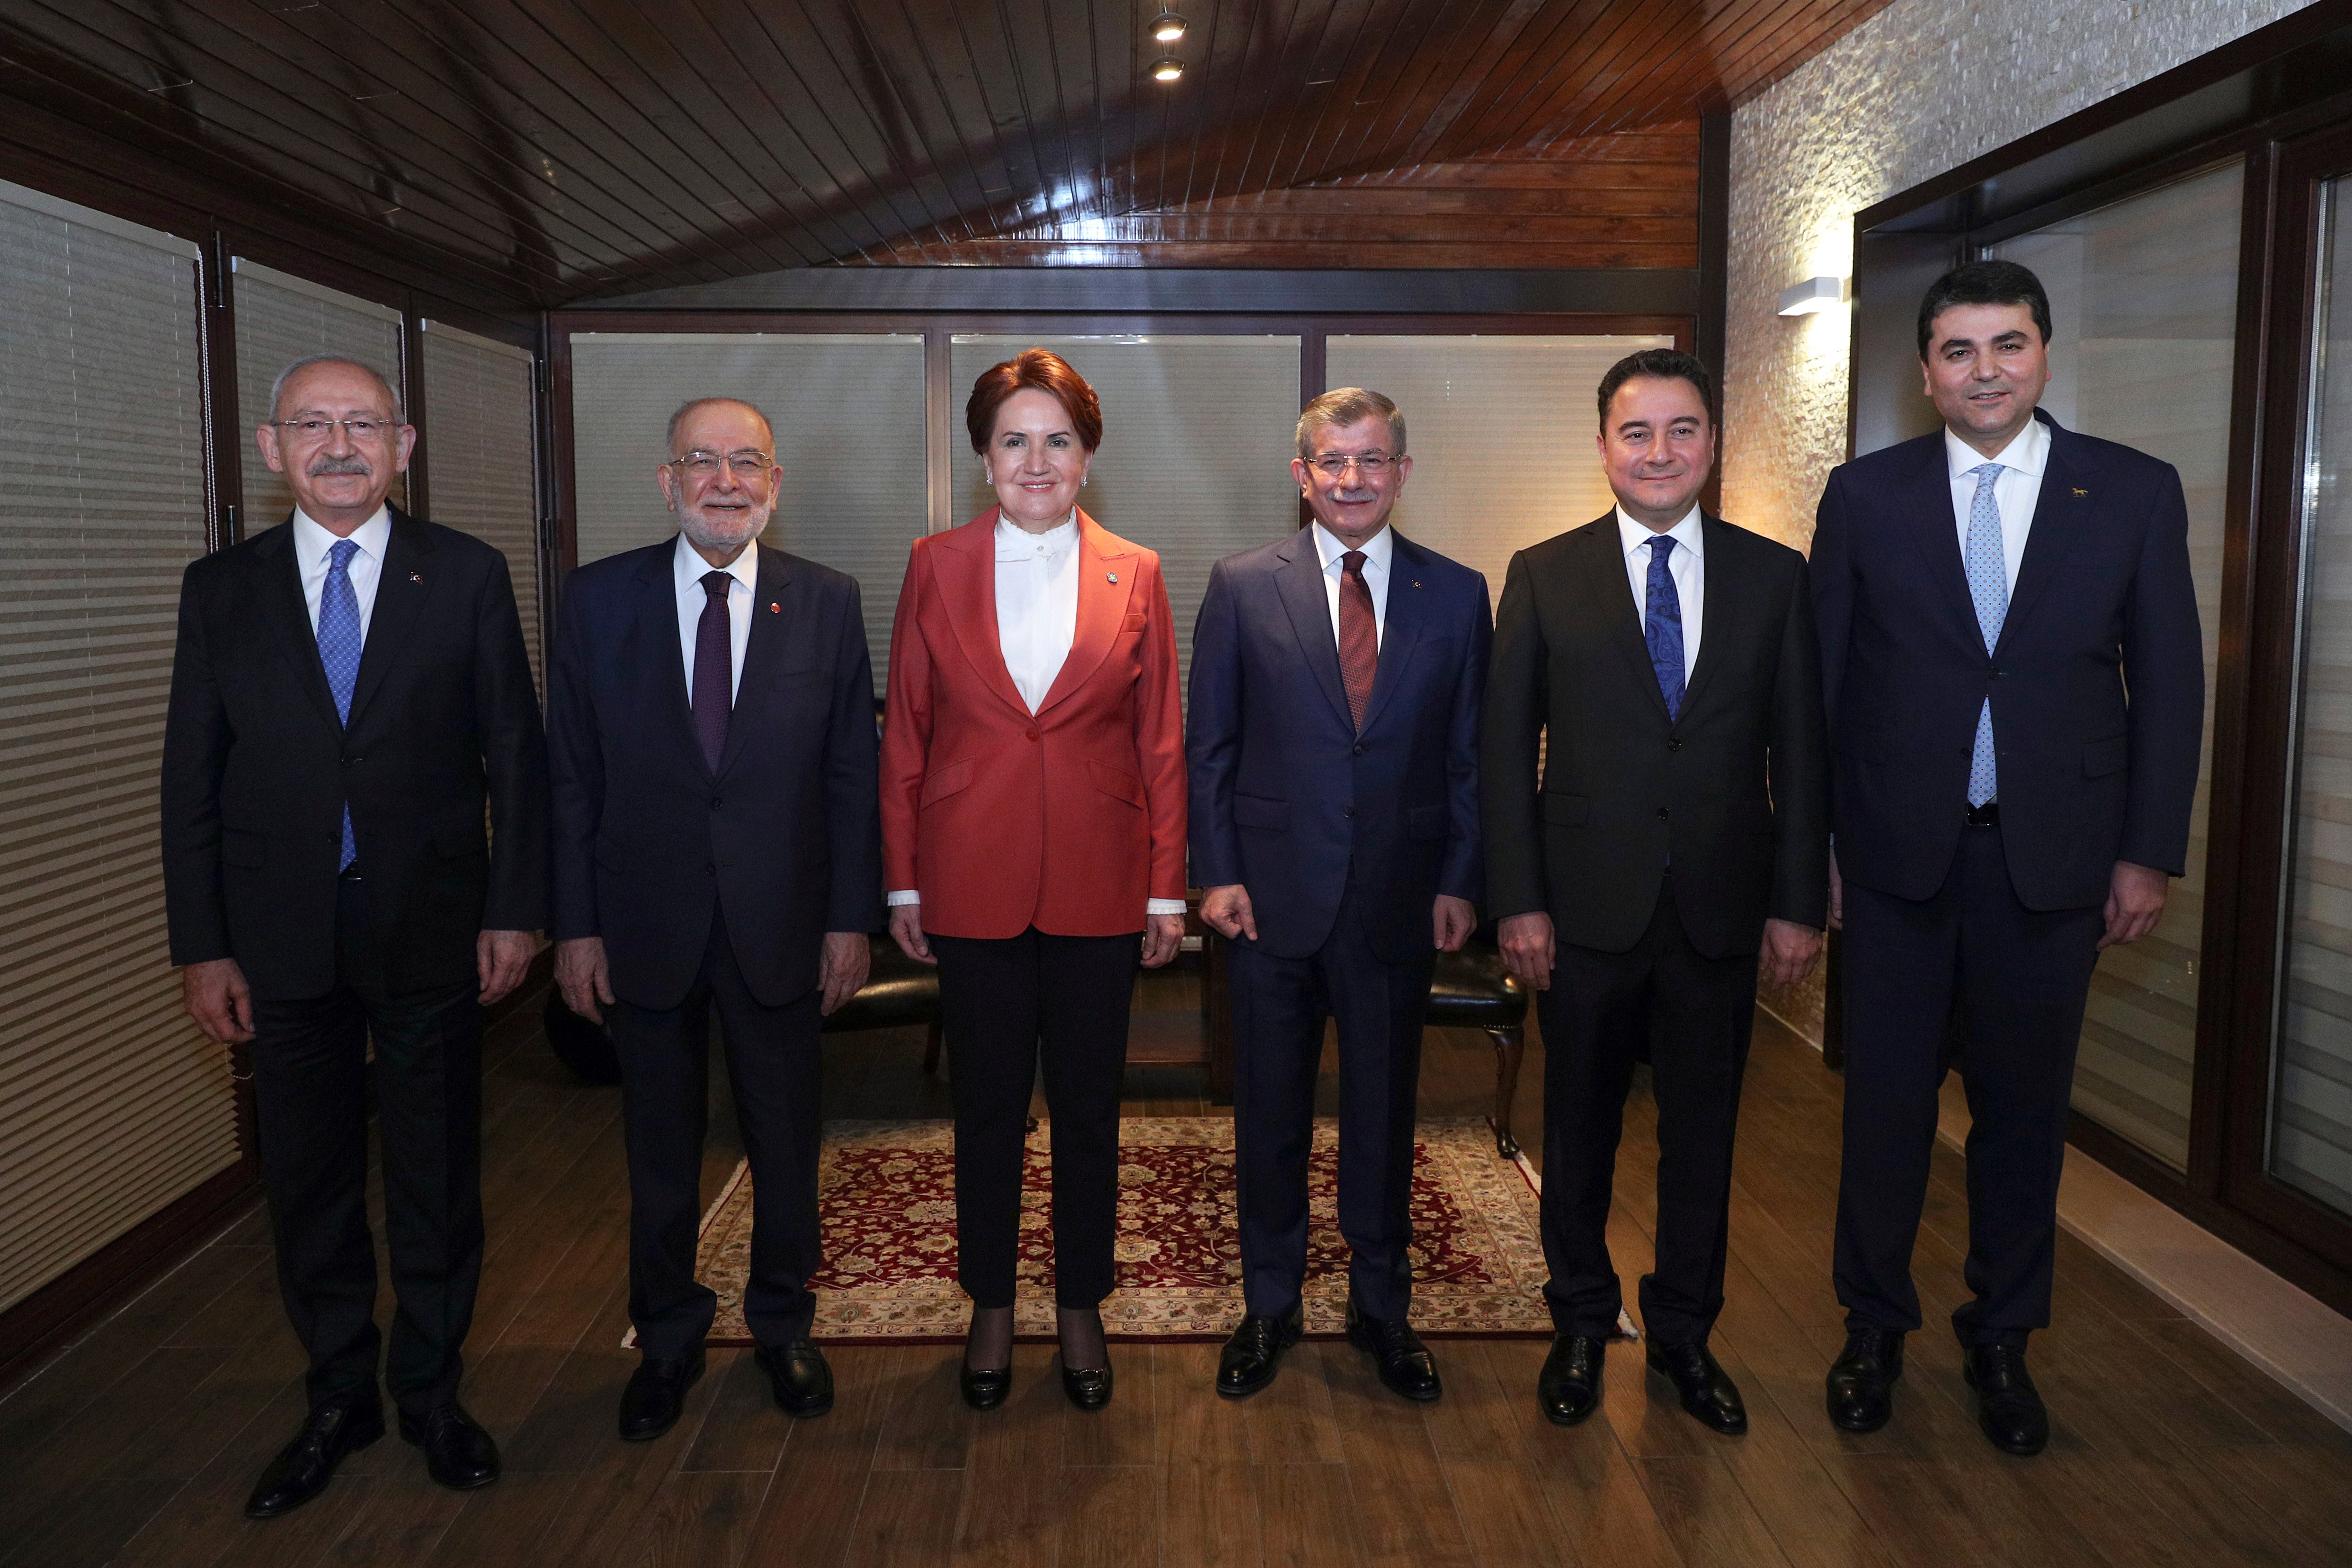 Few believe that Aksener and her party will gain enough power to become the dominant force in Turkish politics